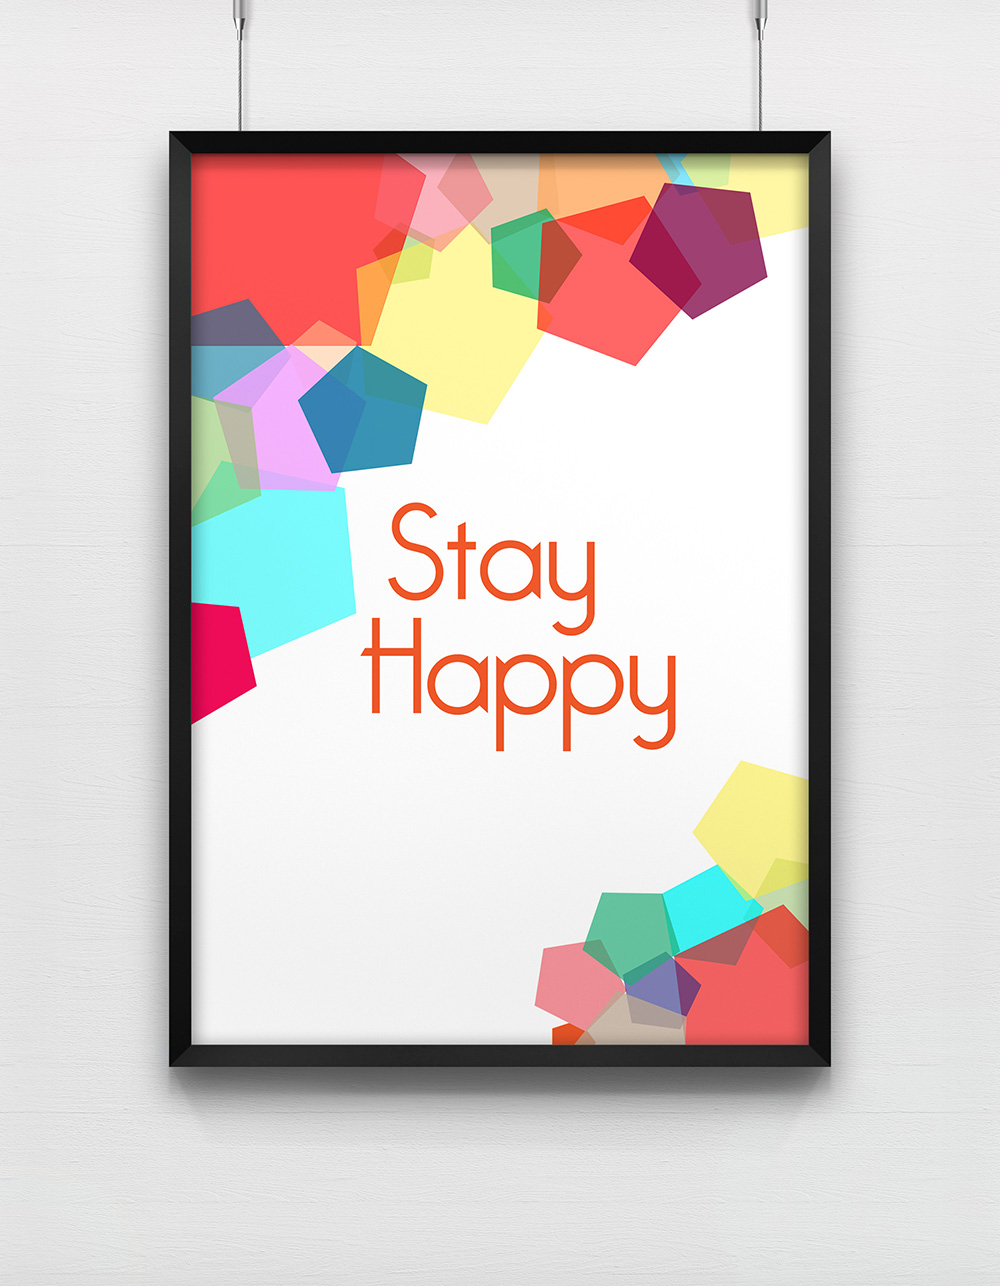 stayhappy_affiche_heureux_travail